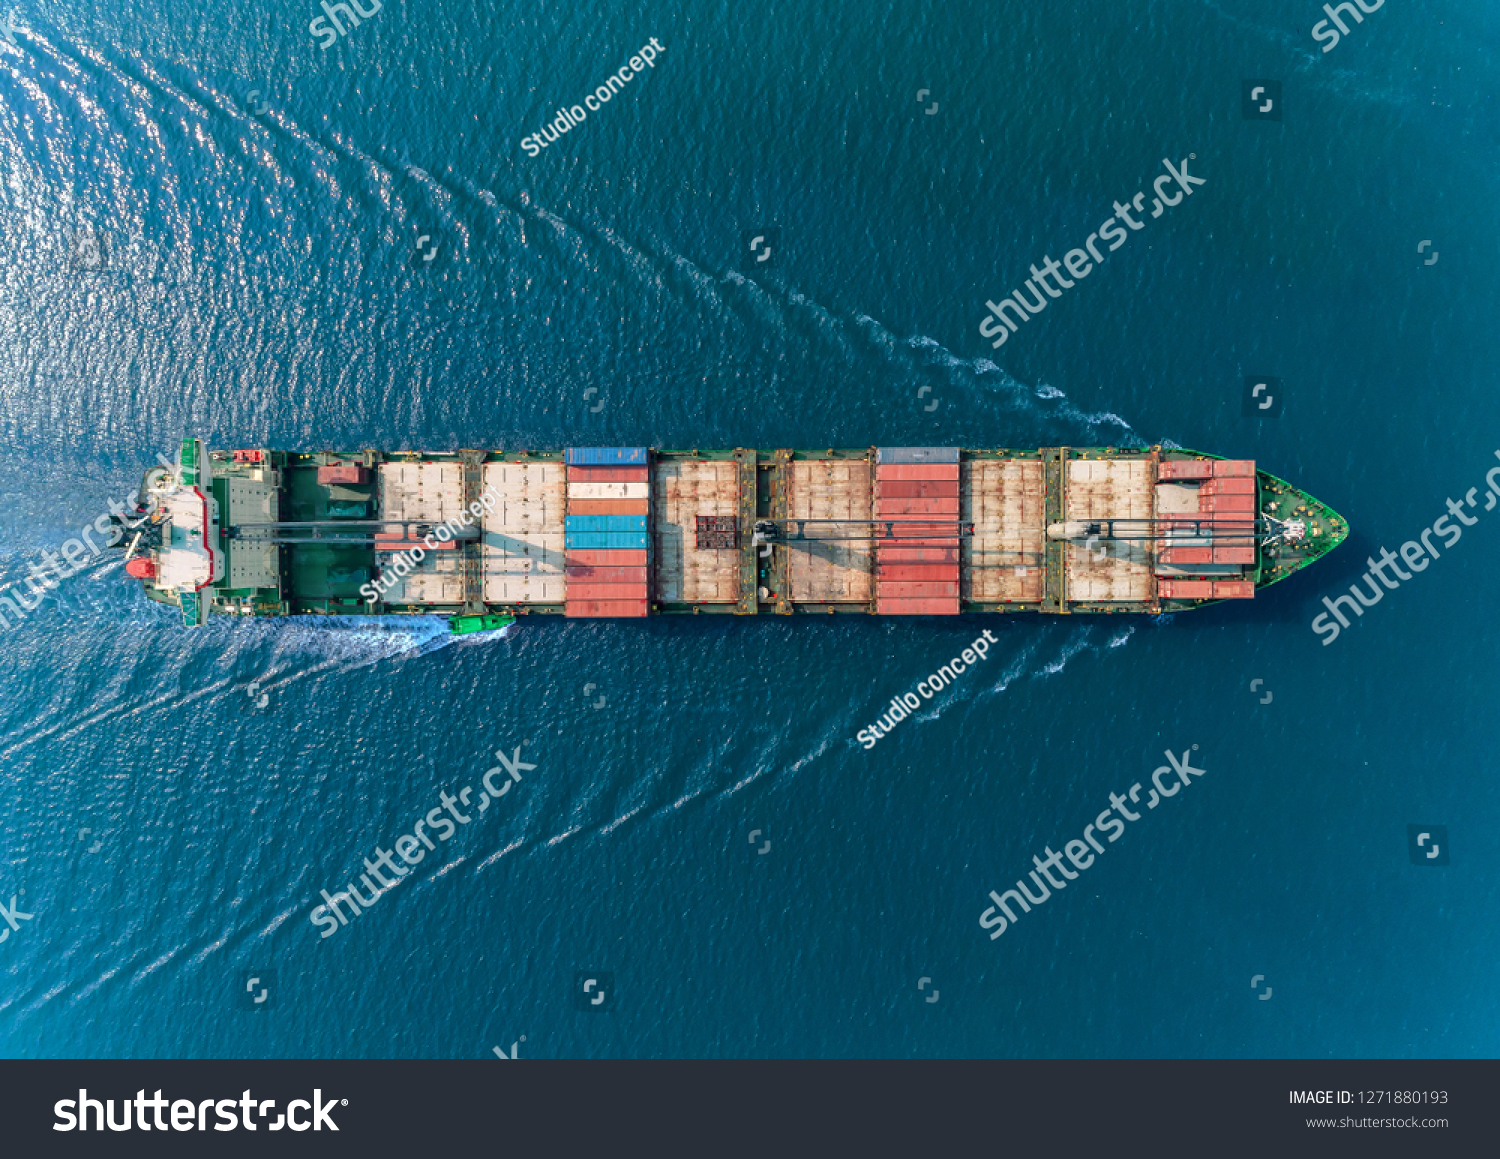 Aerial top view container ship with crane bridge for load container, logistics import export, shipping or transportation concept background. #1271880193